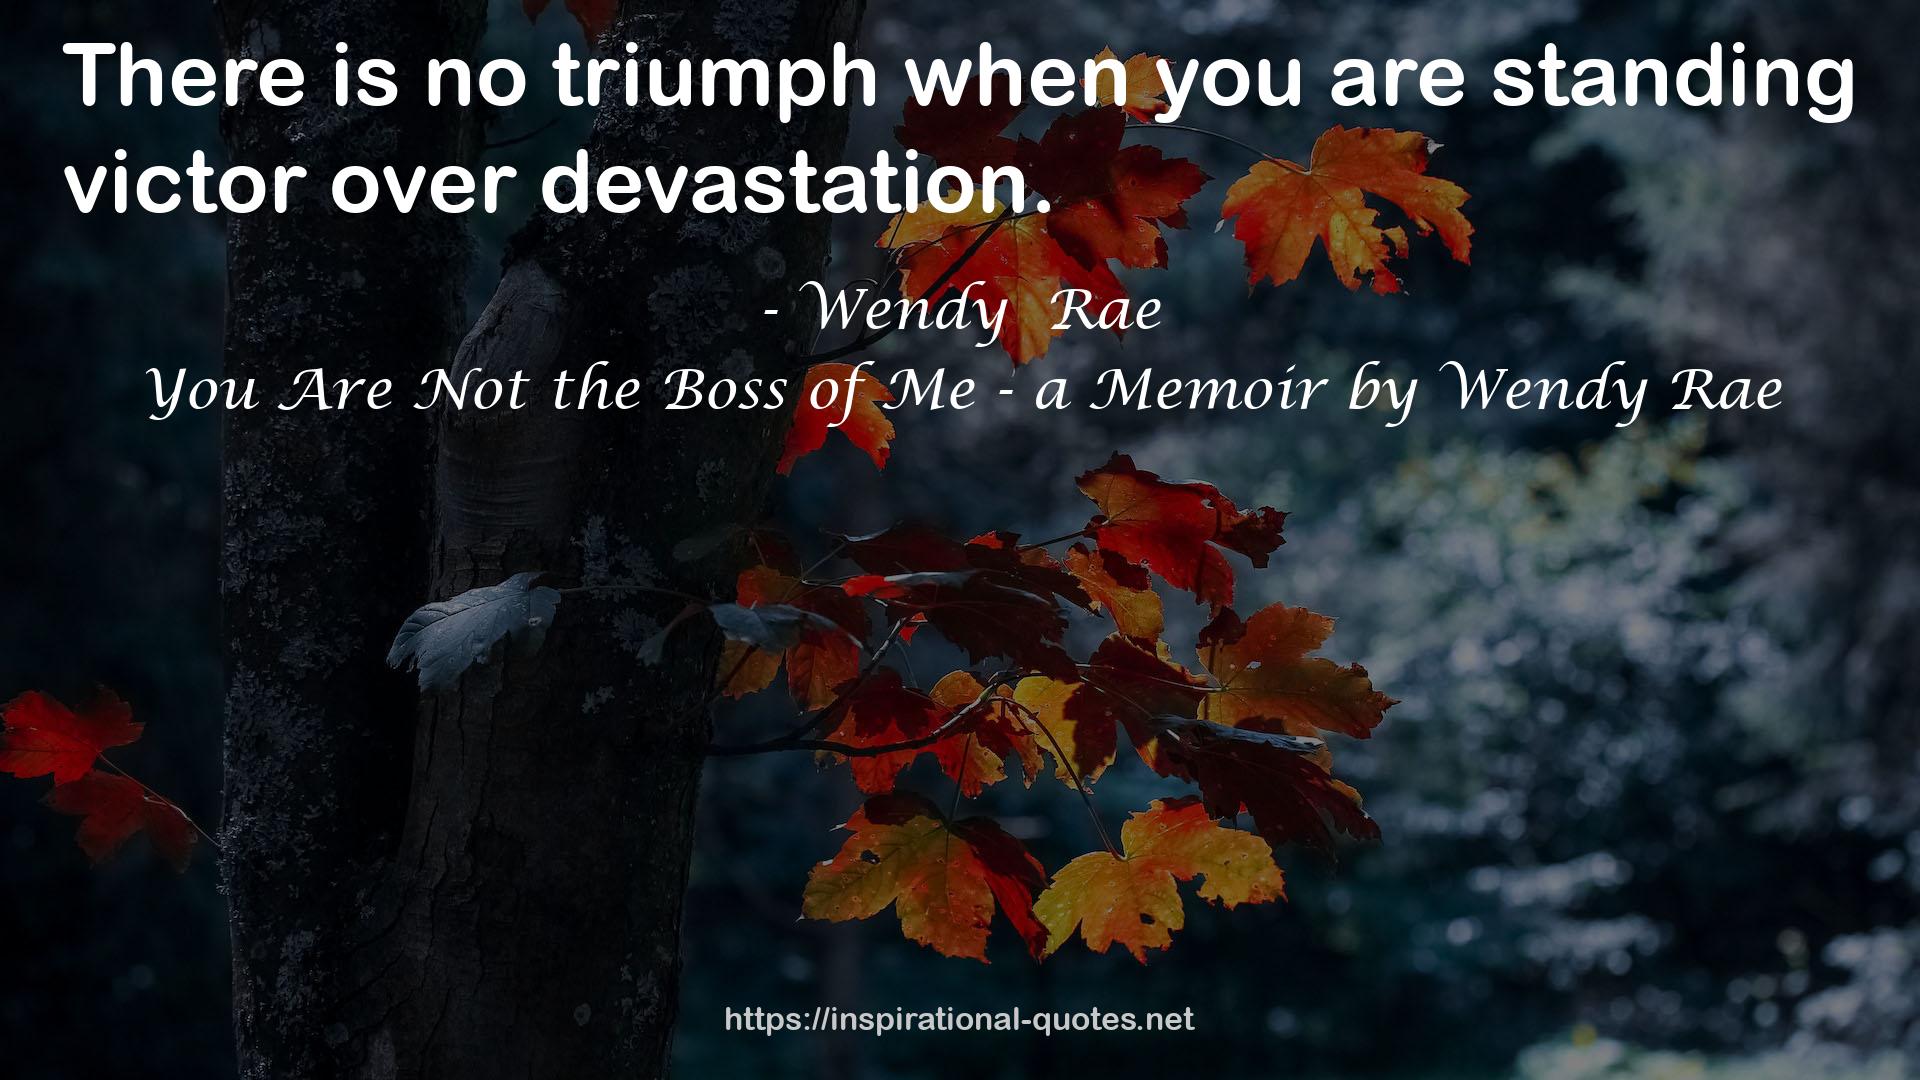 You Are Not the Boss of Me - a Memoir by Wendy Rae QUOTES